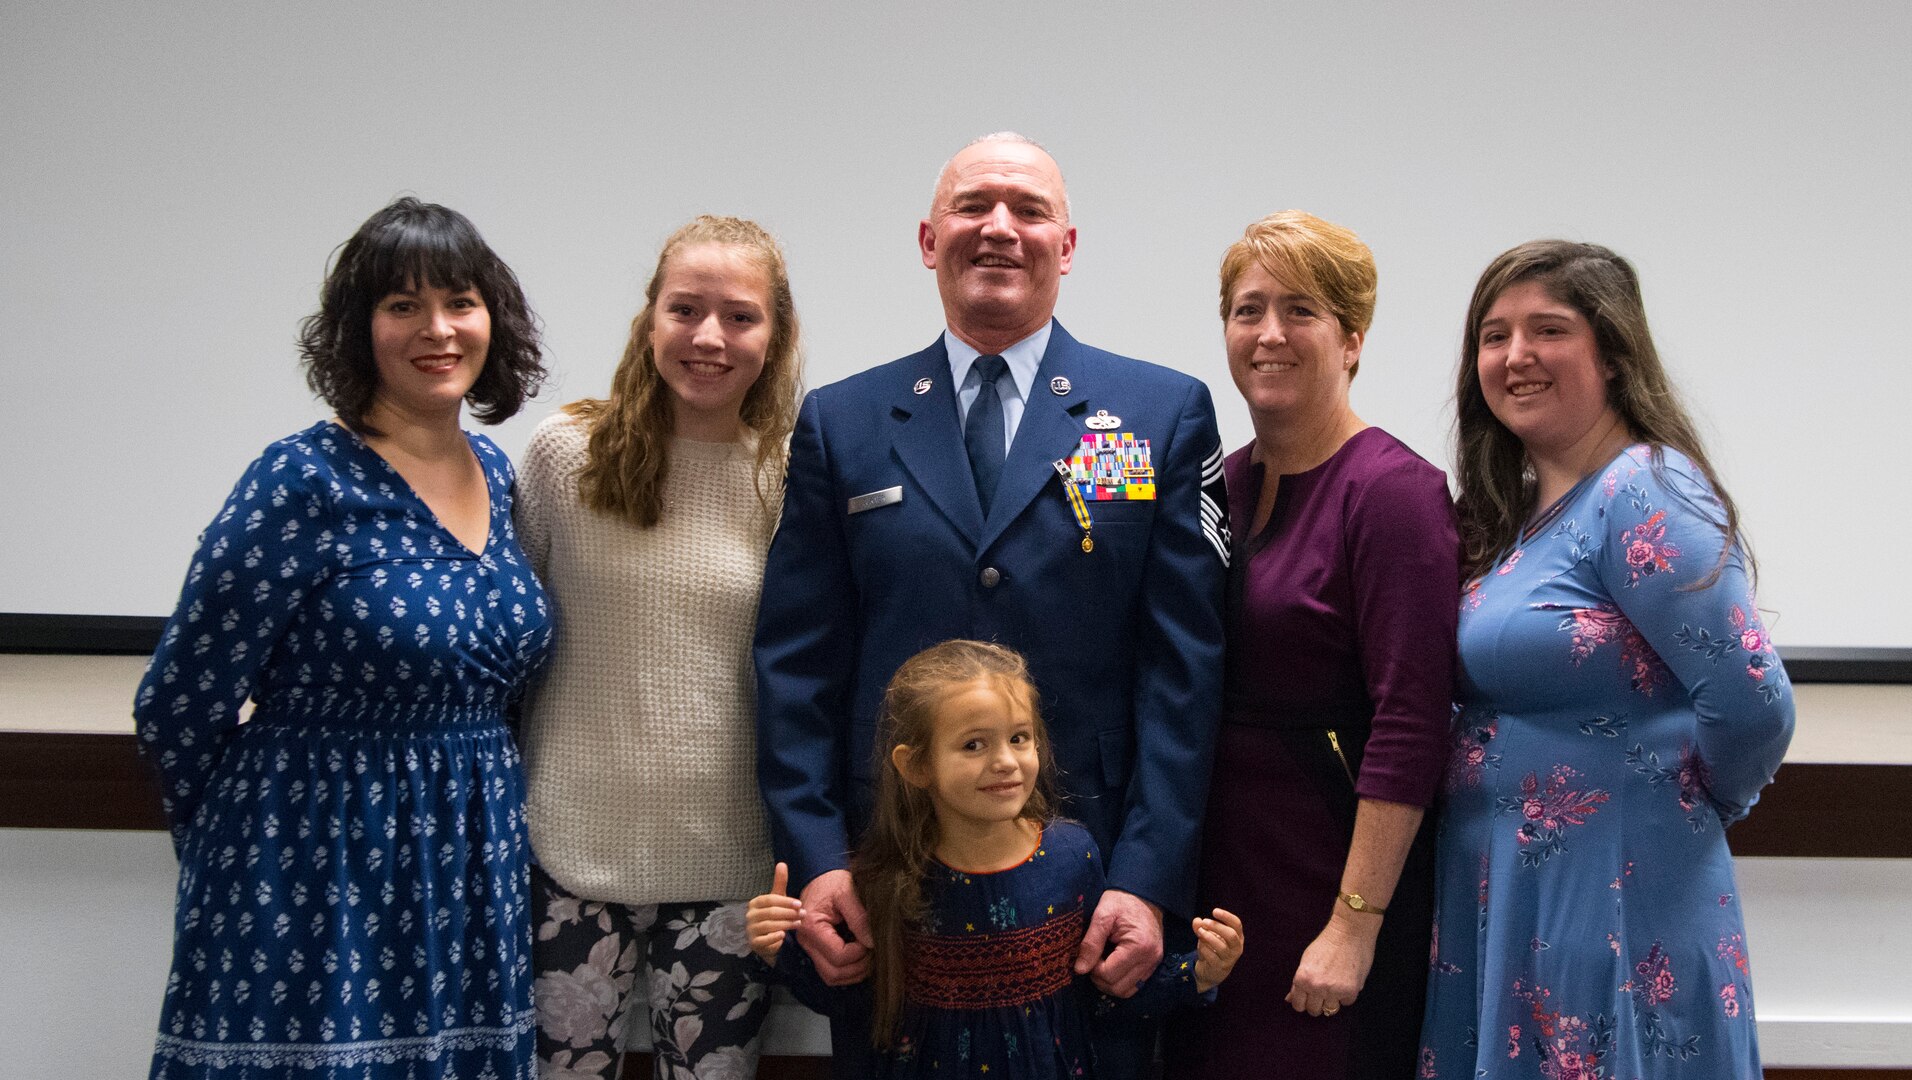 The family and friends of Chief Master Sgt. Fred Turner pose for a photo following a formal retirement ceremony held in his honor Jan. 4, 2019, at McLaughlin Air National Guard Base, Charleston, W.Va. Turner served in the California and West Virginia Air National Guard for 41 years cumulatively and was also the 12th State Command Chief for the West Virginia Air National Guard. (U.S. Air National Guard photo by Master Sgt. De-Juan Haley)